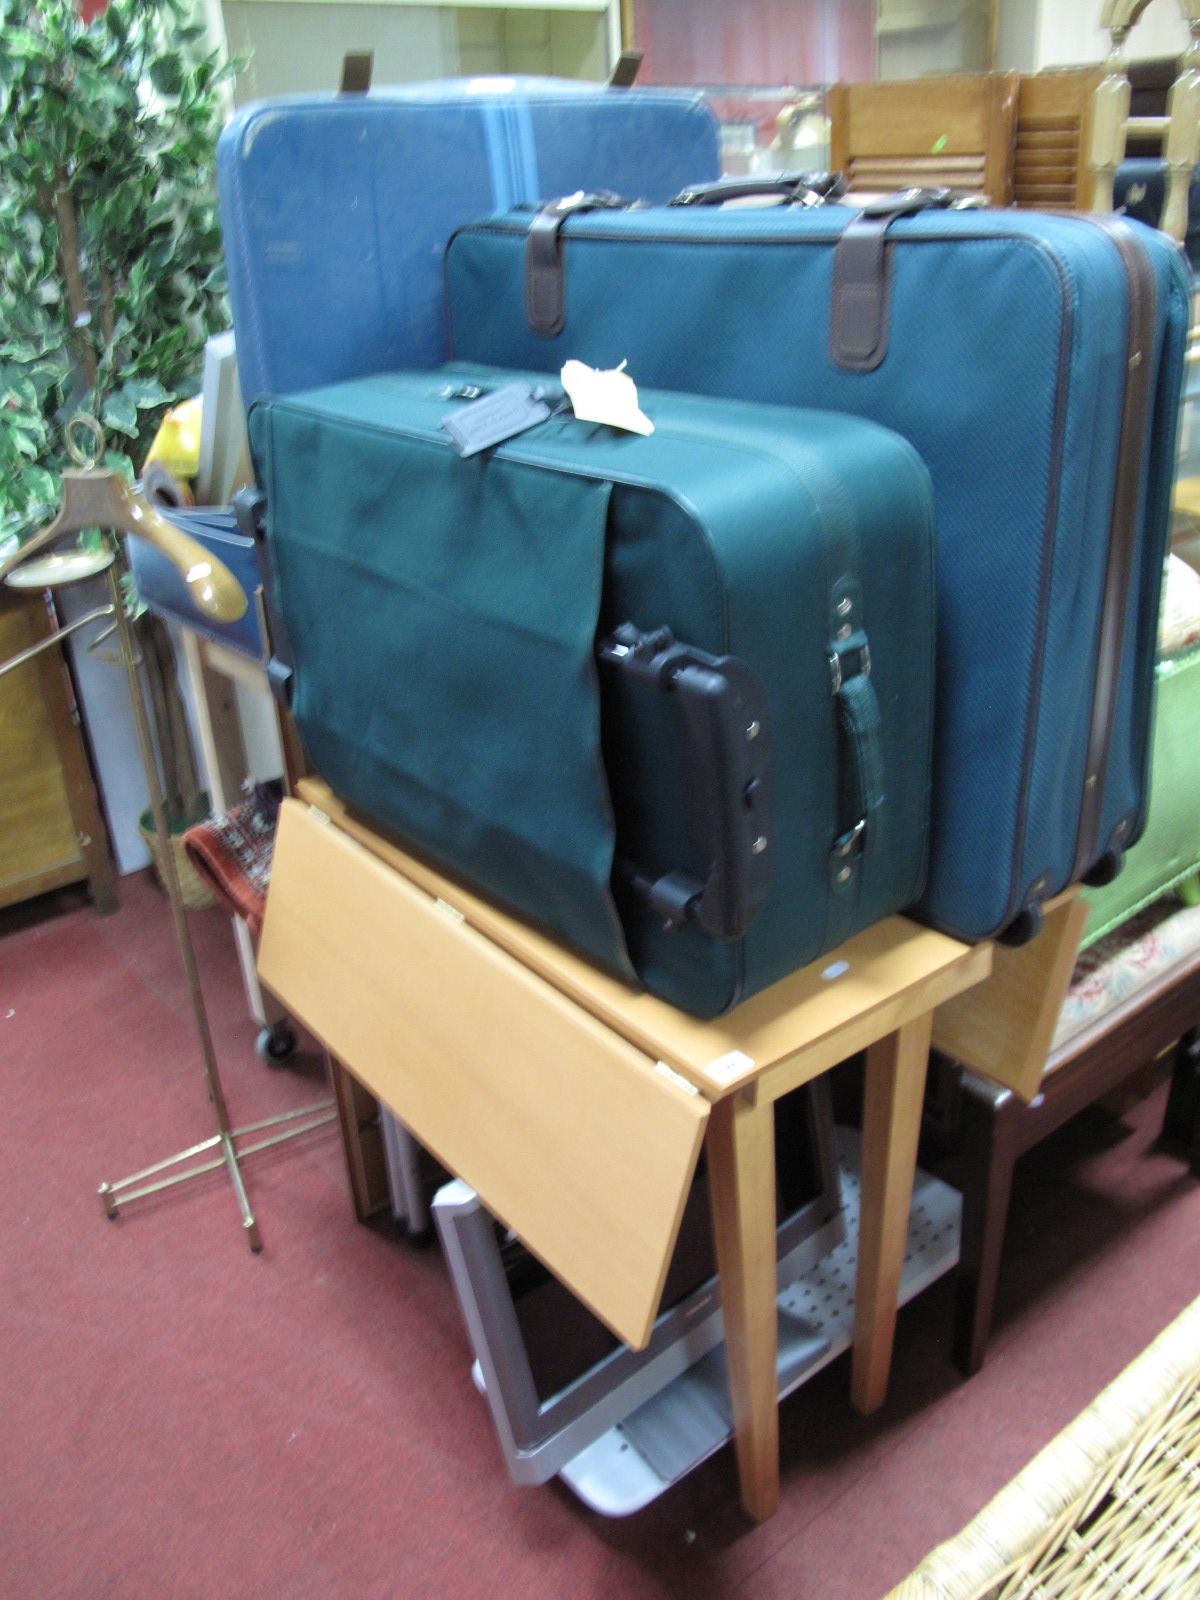 A Drop Leaf Kitchen Table, a Toshiba TV, tray, household steps and two travel cases.